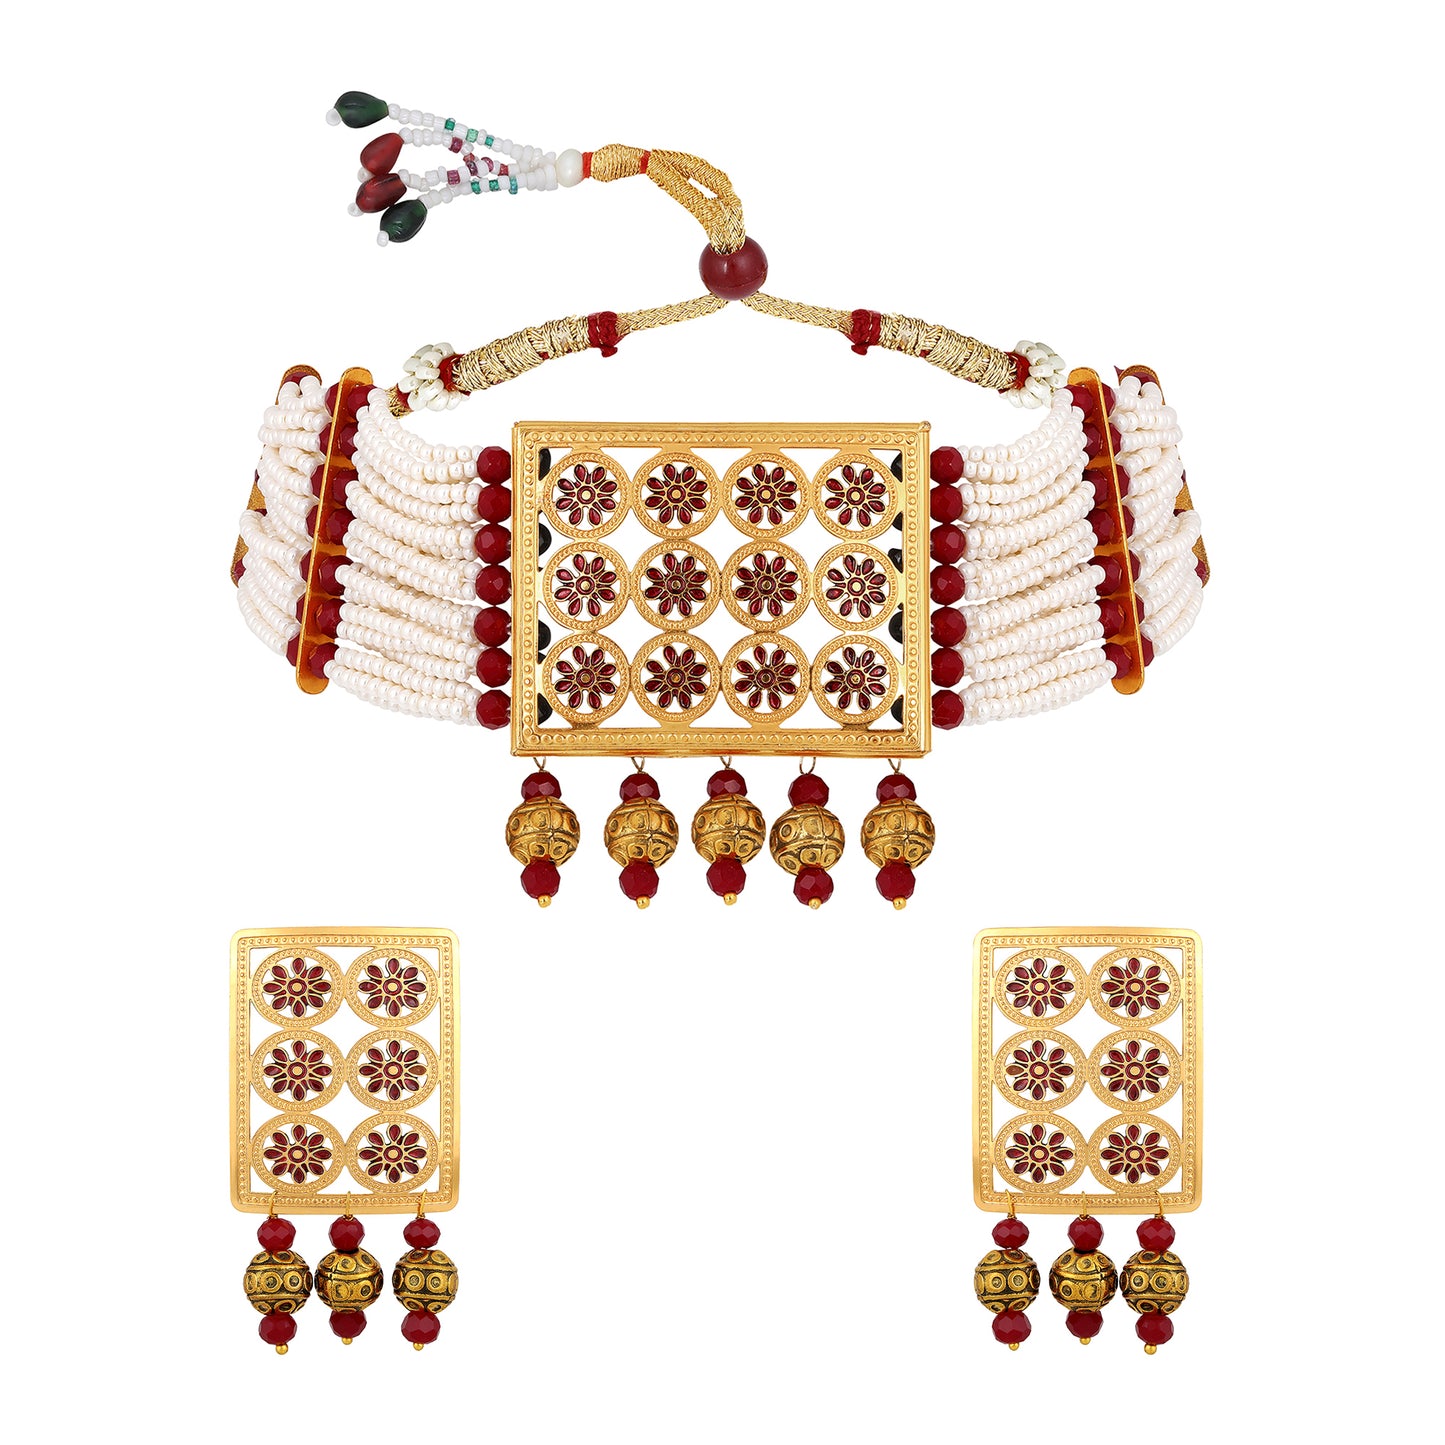 Bdiva 18K Gold Plated Intricately Carved Red Beads Rectangular Choker Necklace.